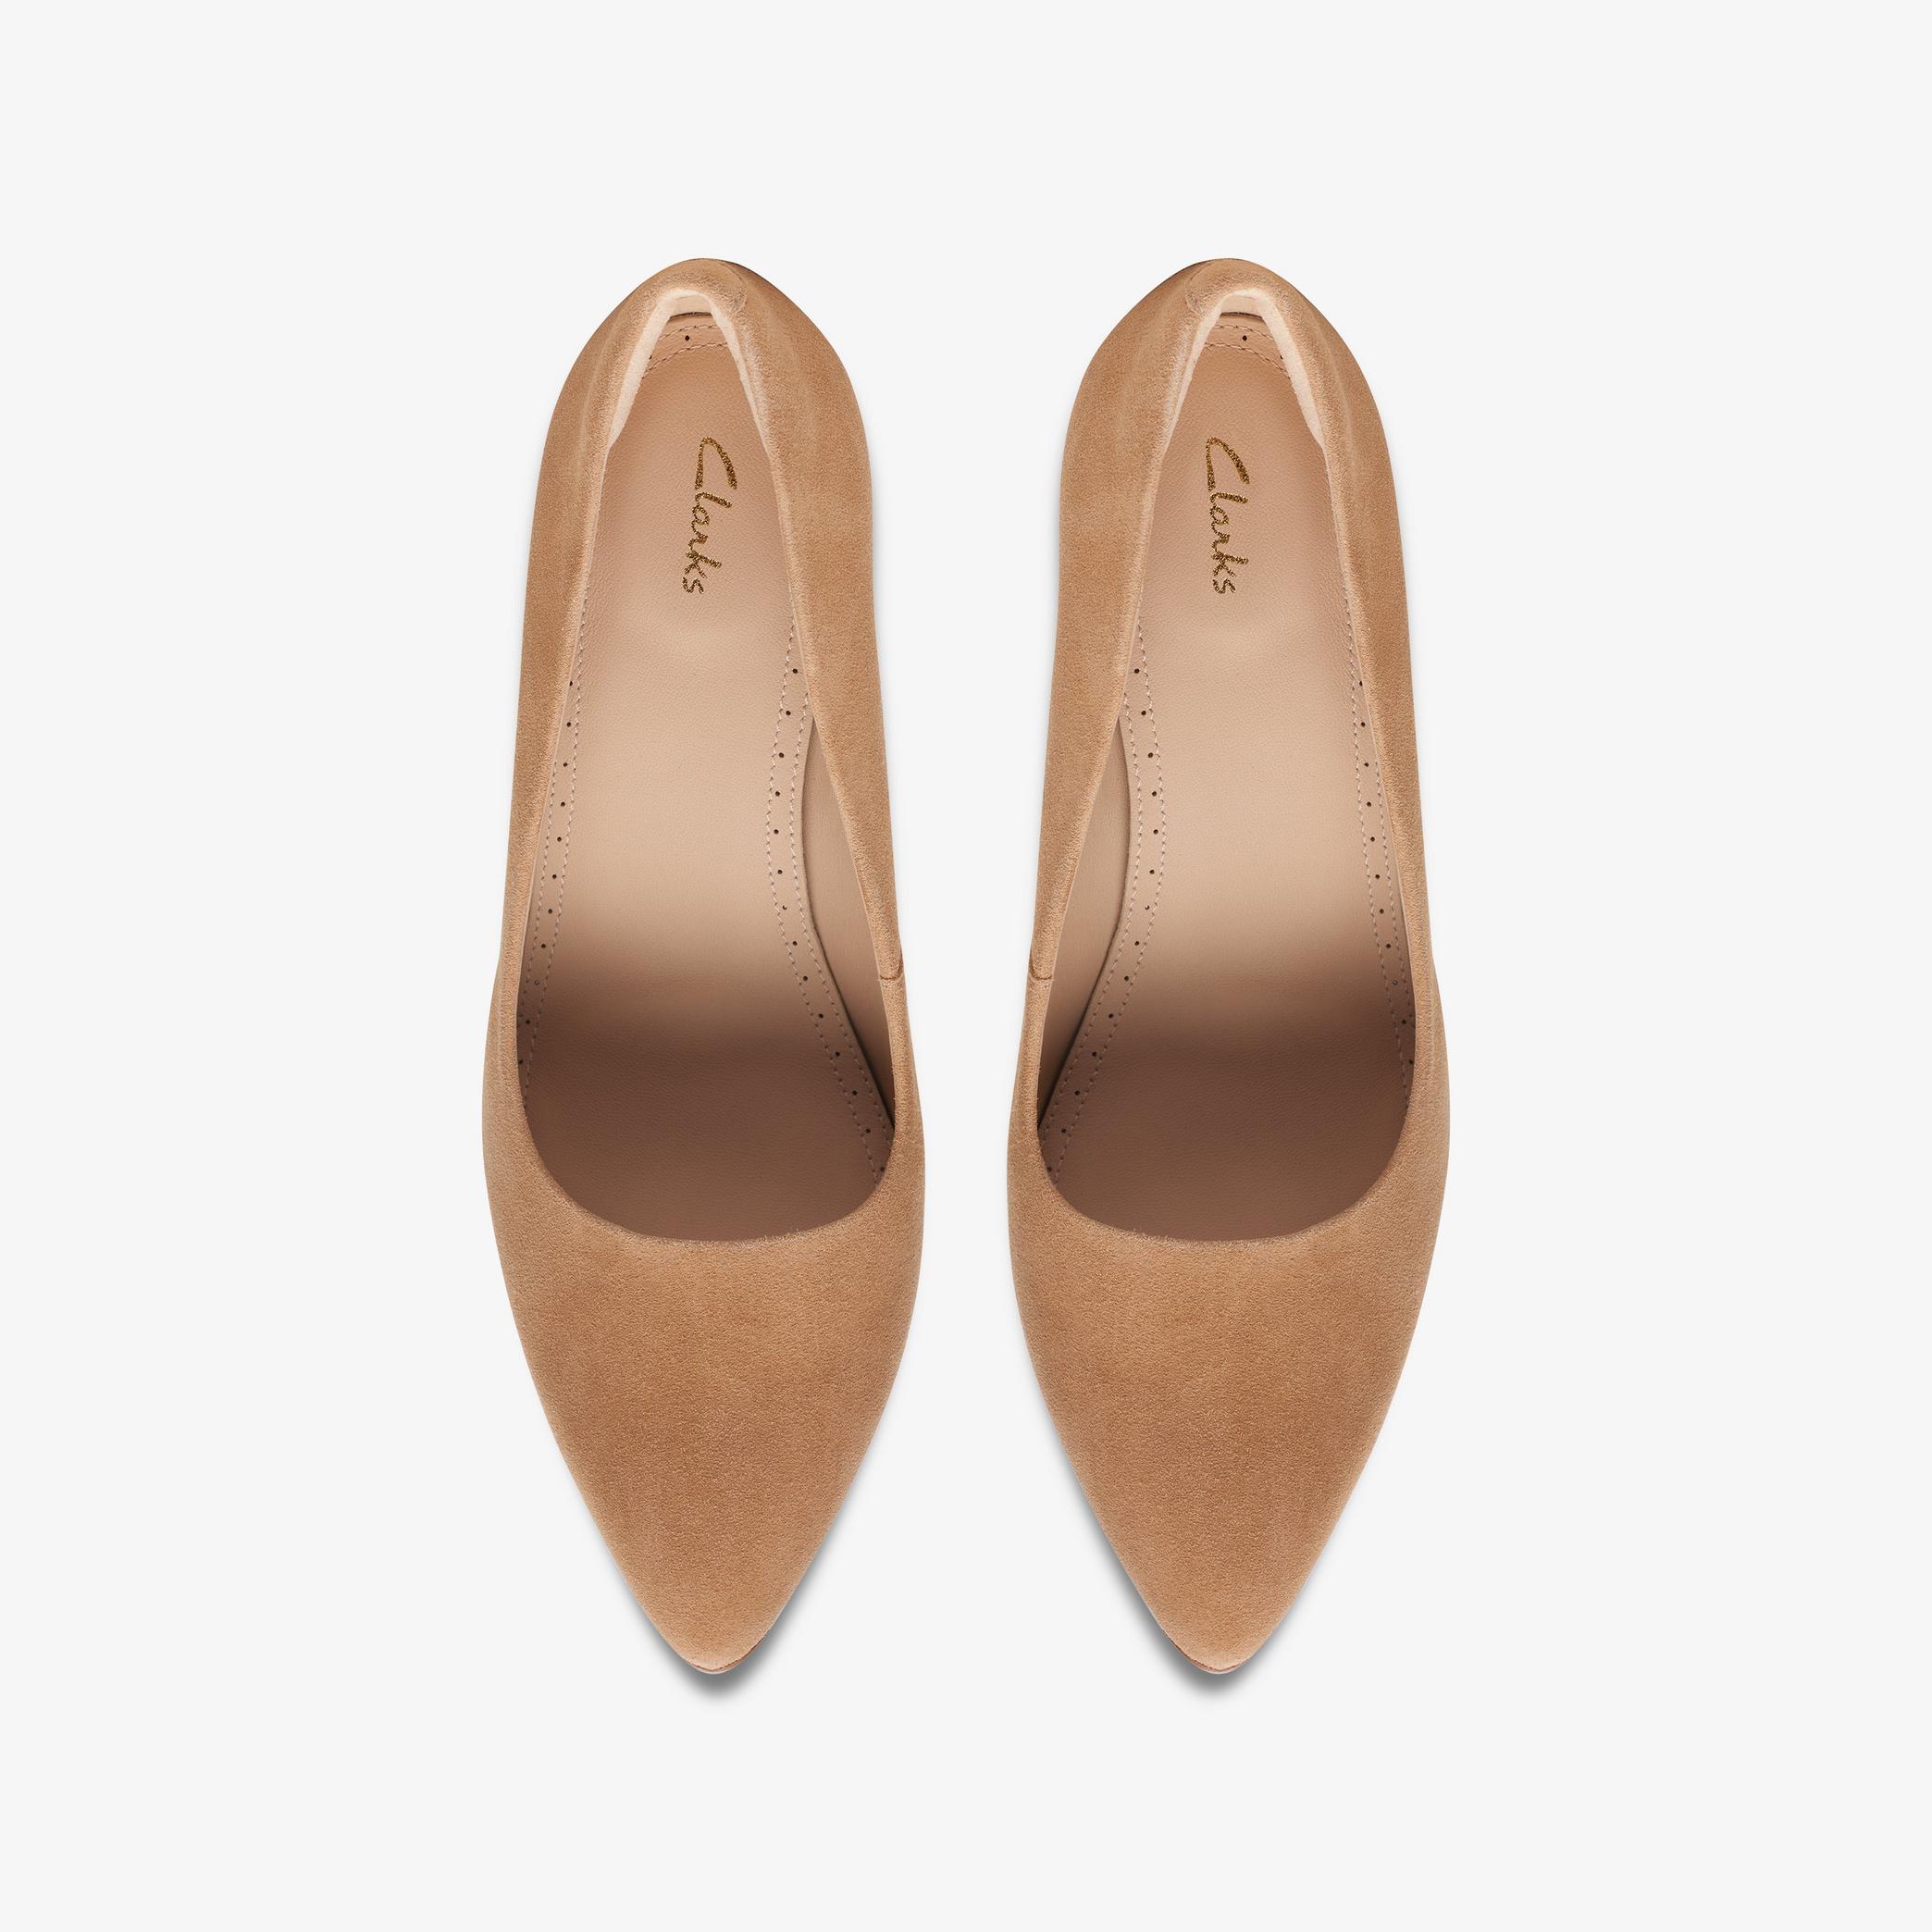 Laina Rae Camel Suede Court Shoes, view 6 of 6